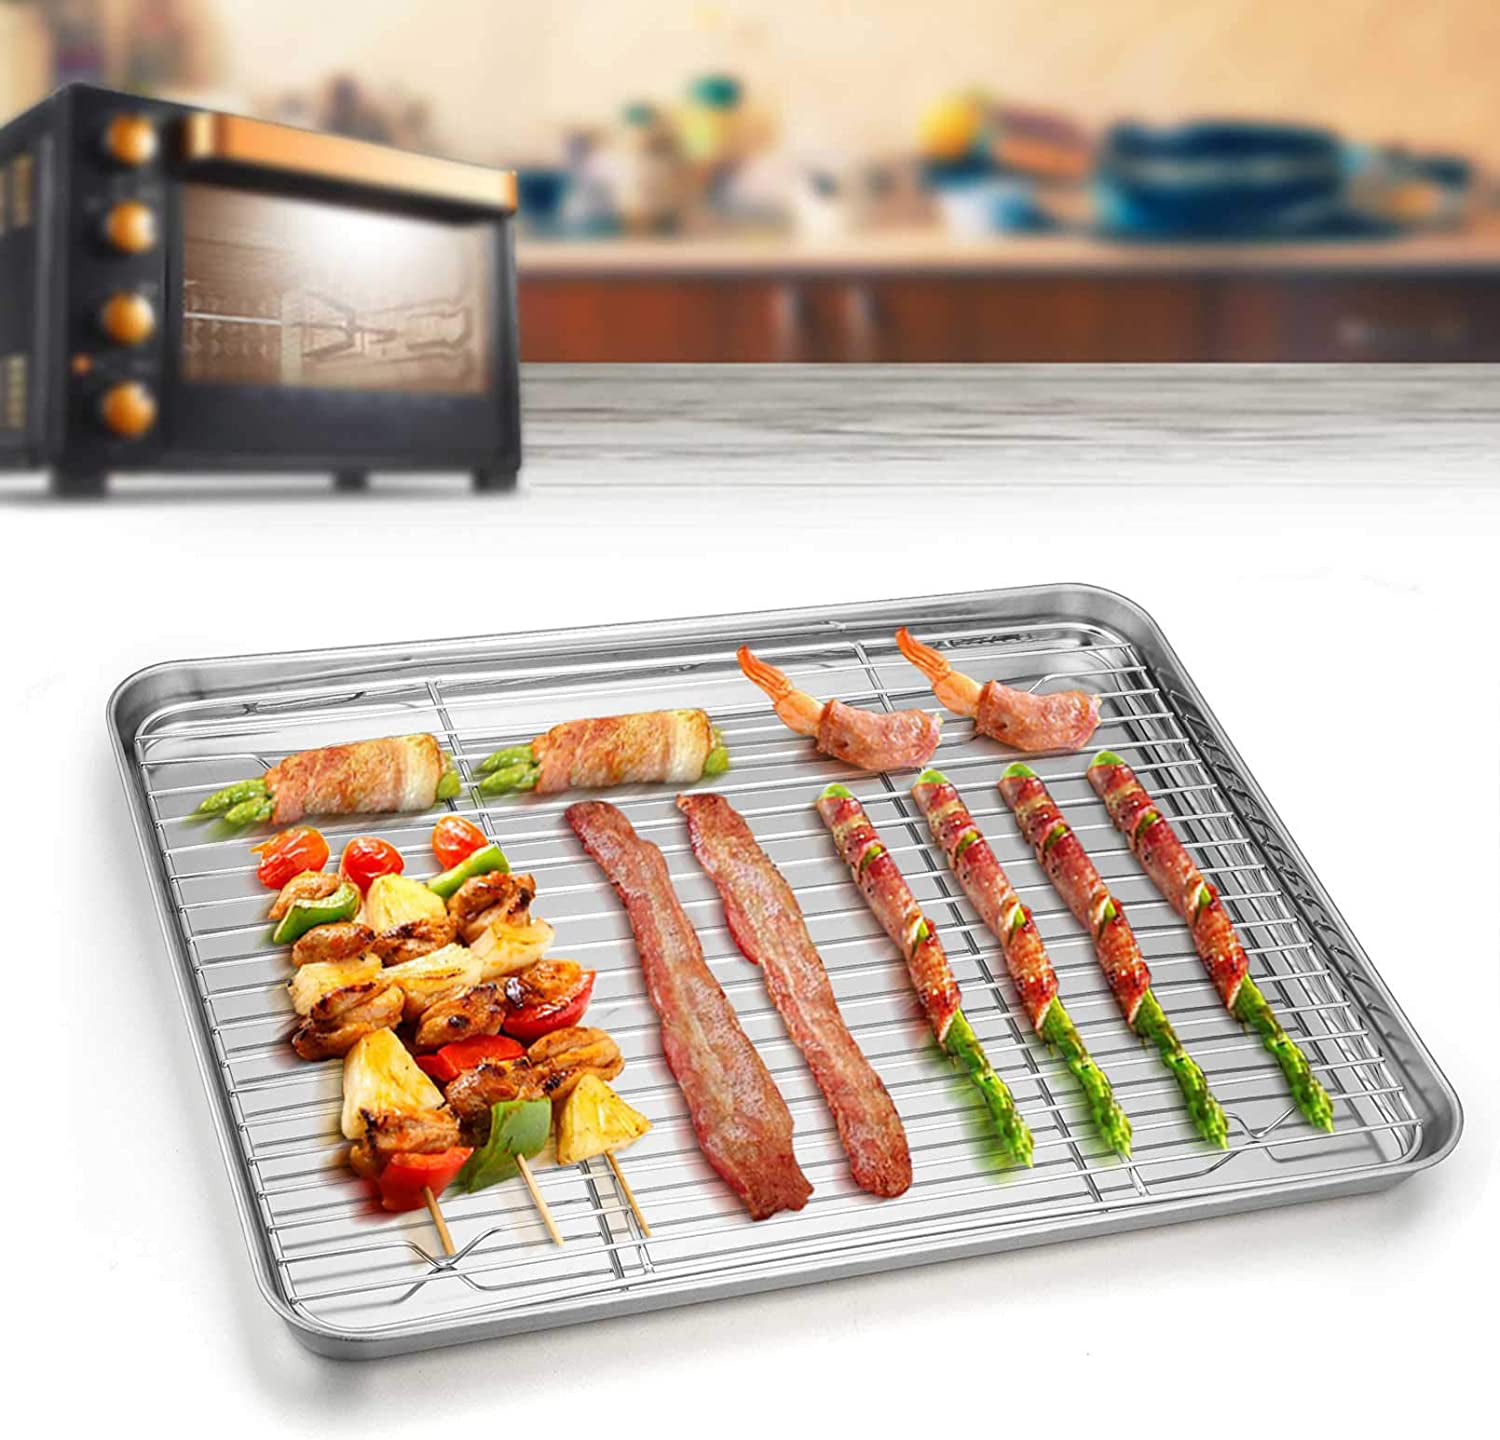 Stainless Steel Baking Sheet with Rack Set, E-far 12.4”x9.7” Cookie Sheet  Broiling Pan for Oven, Rimmed Metal Tray with Wire Rack for